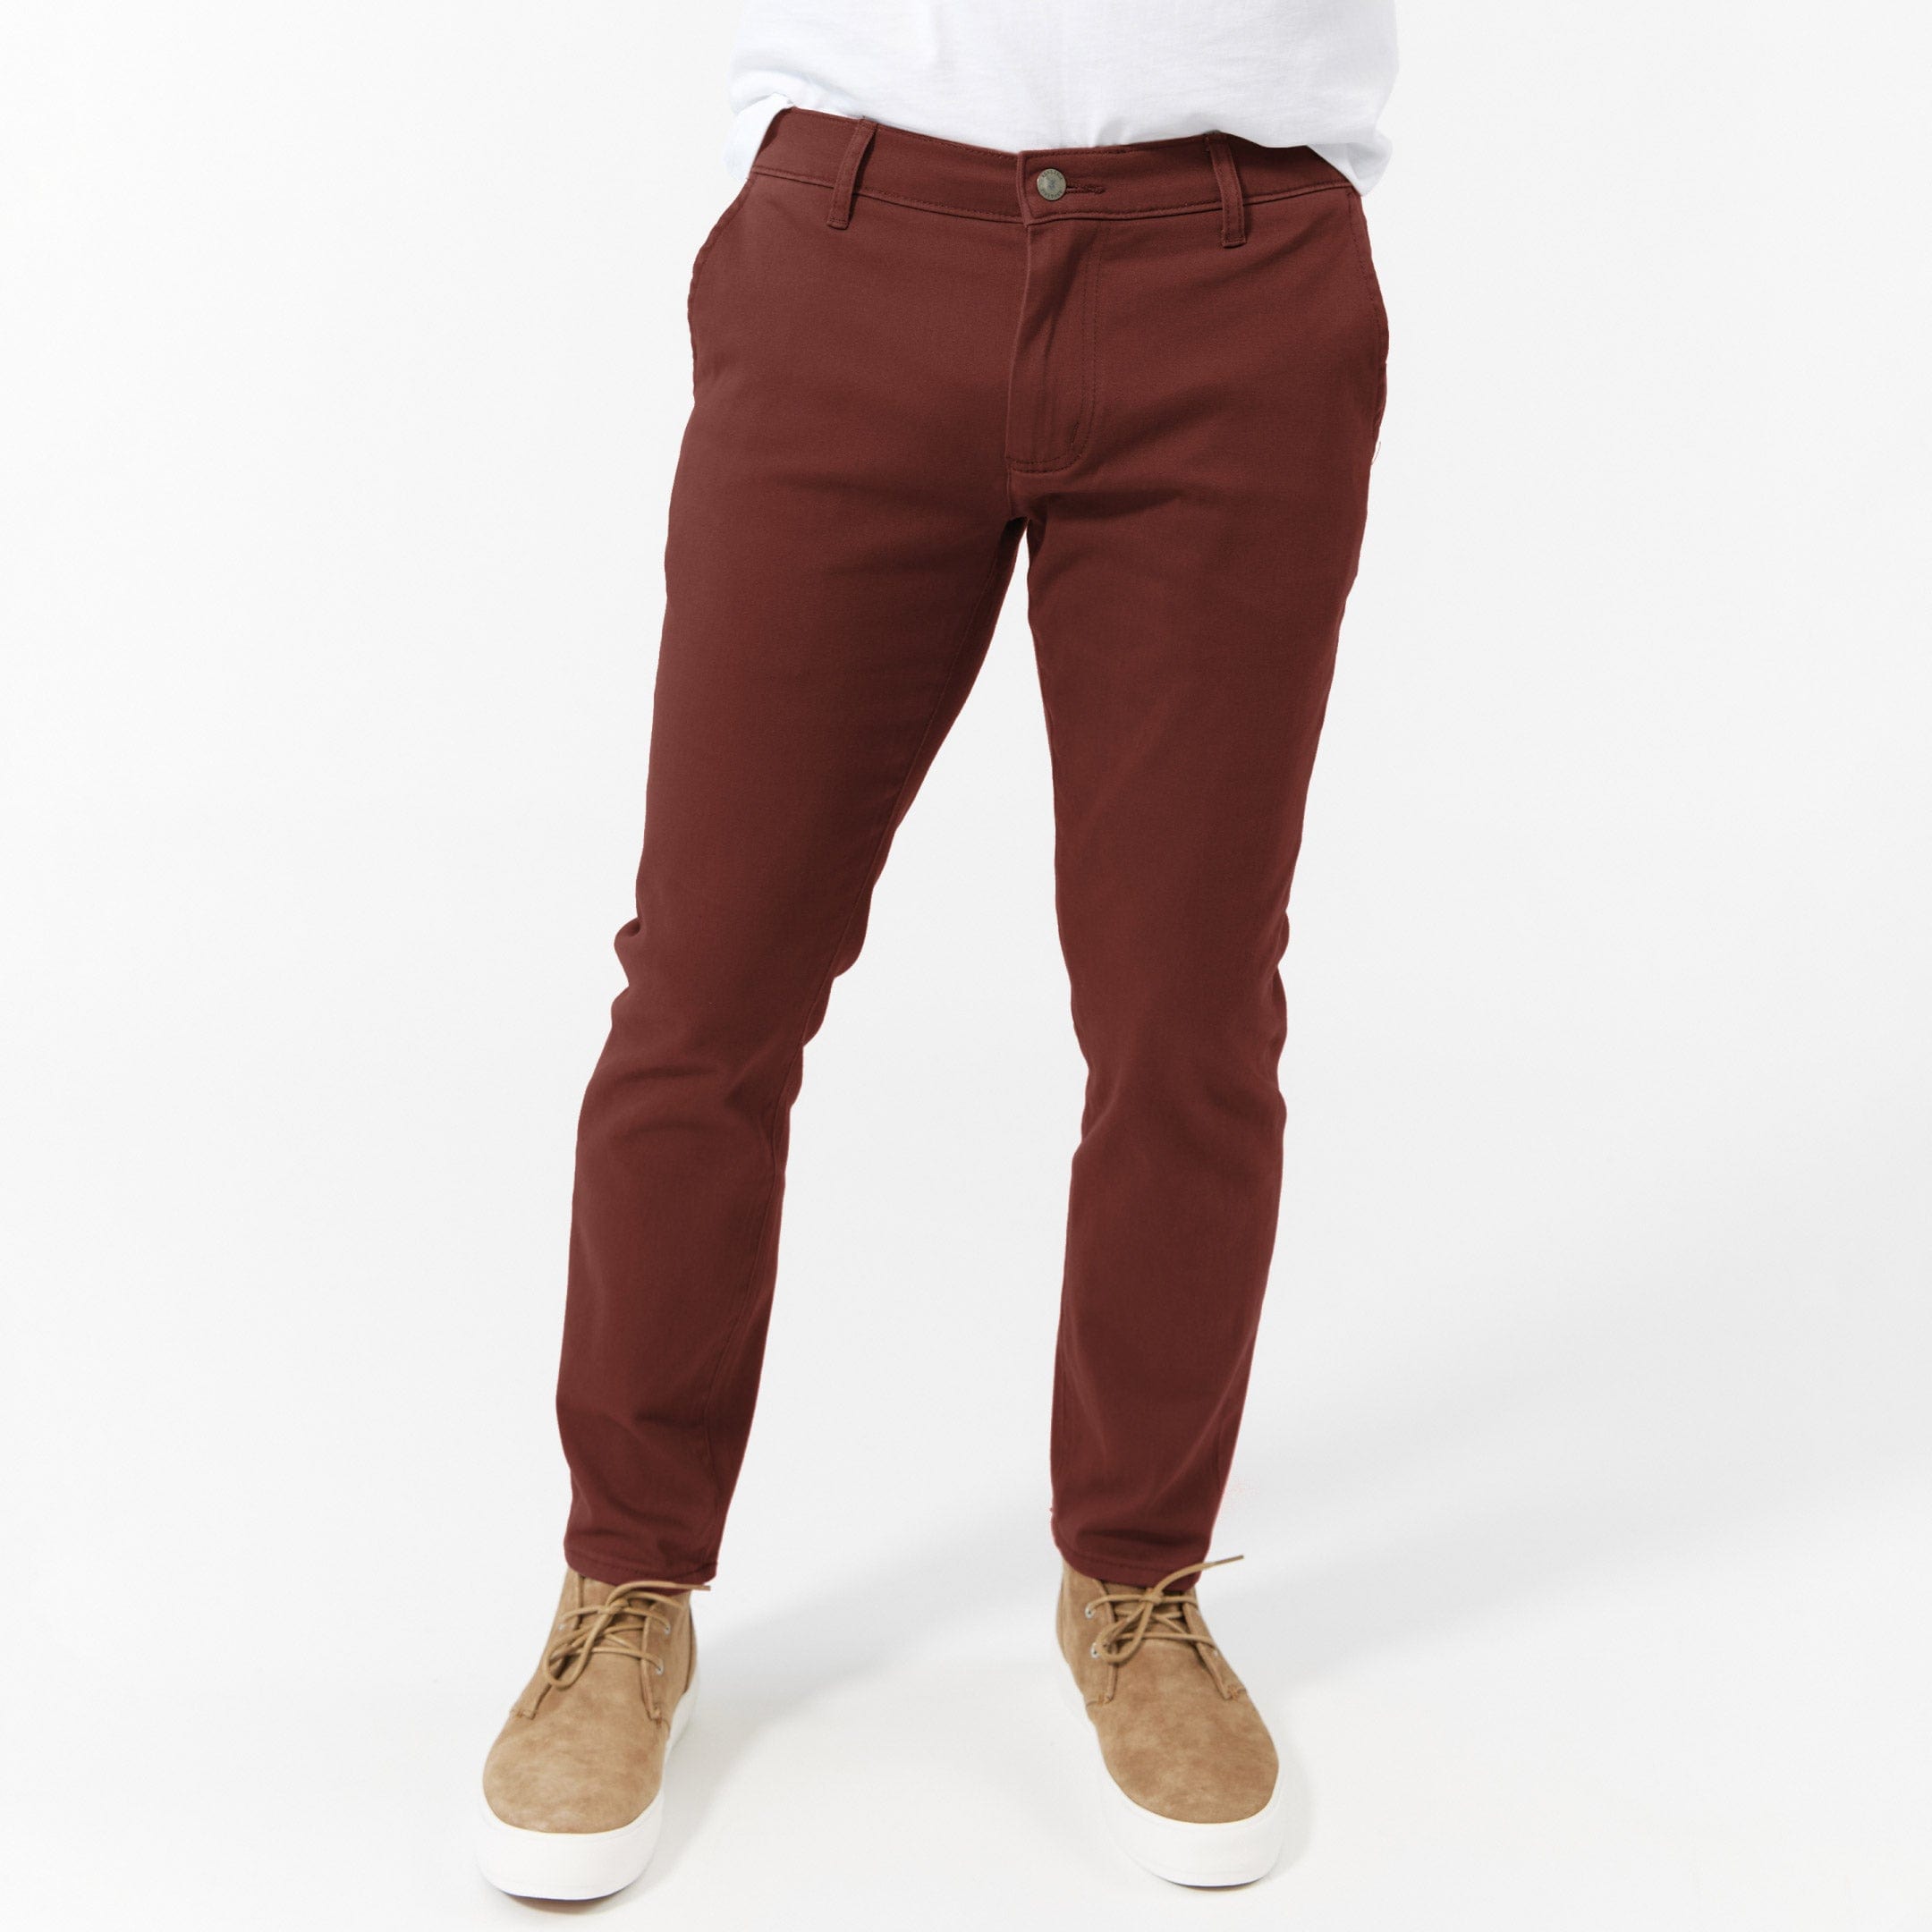 What are the differences between chinos and trousers? - Quora